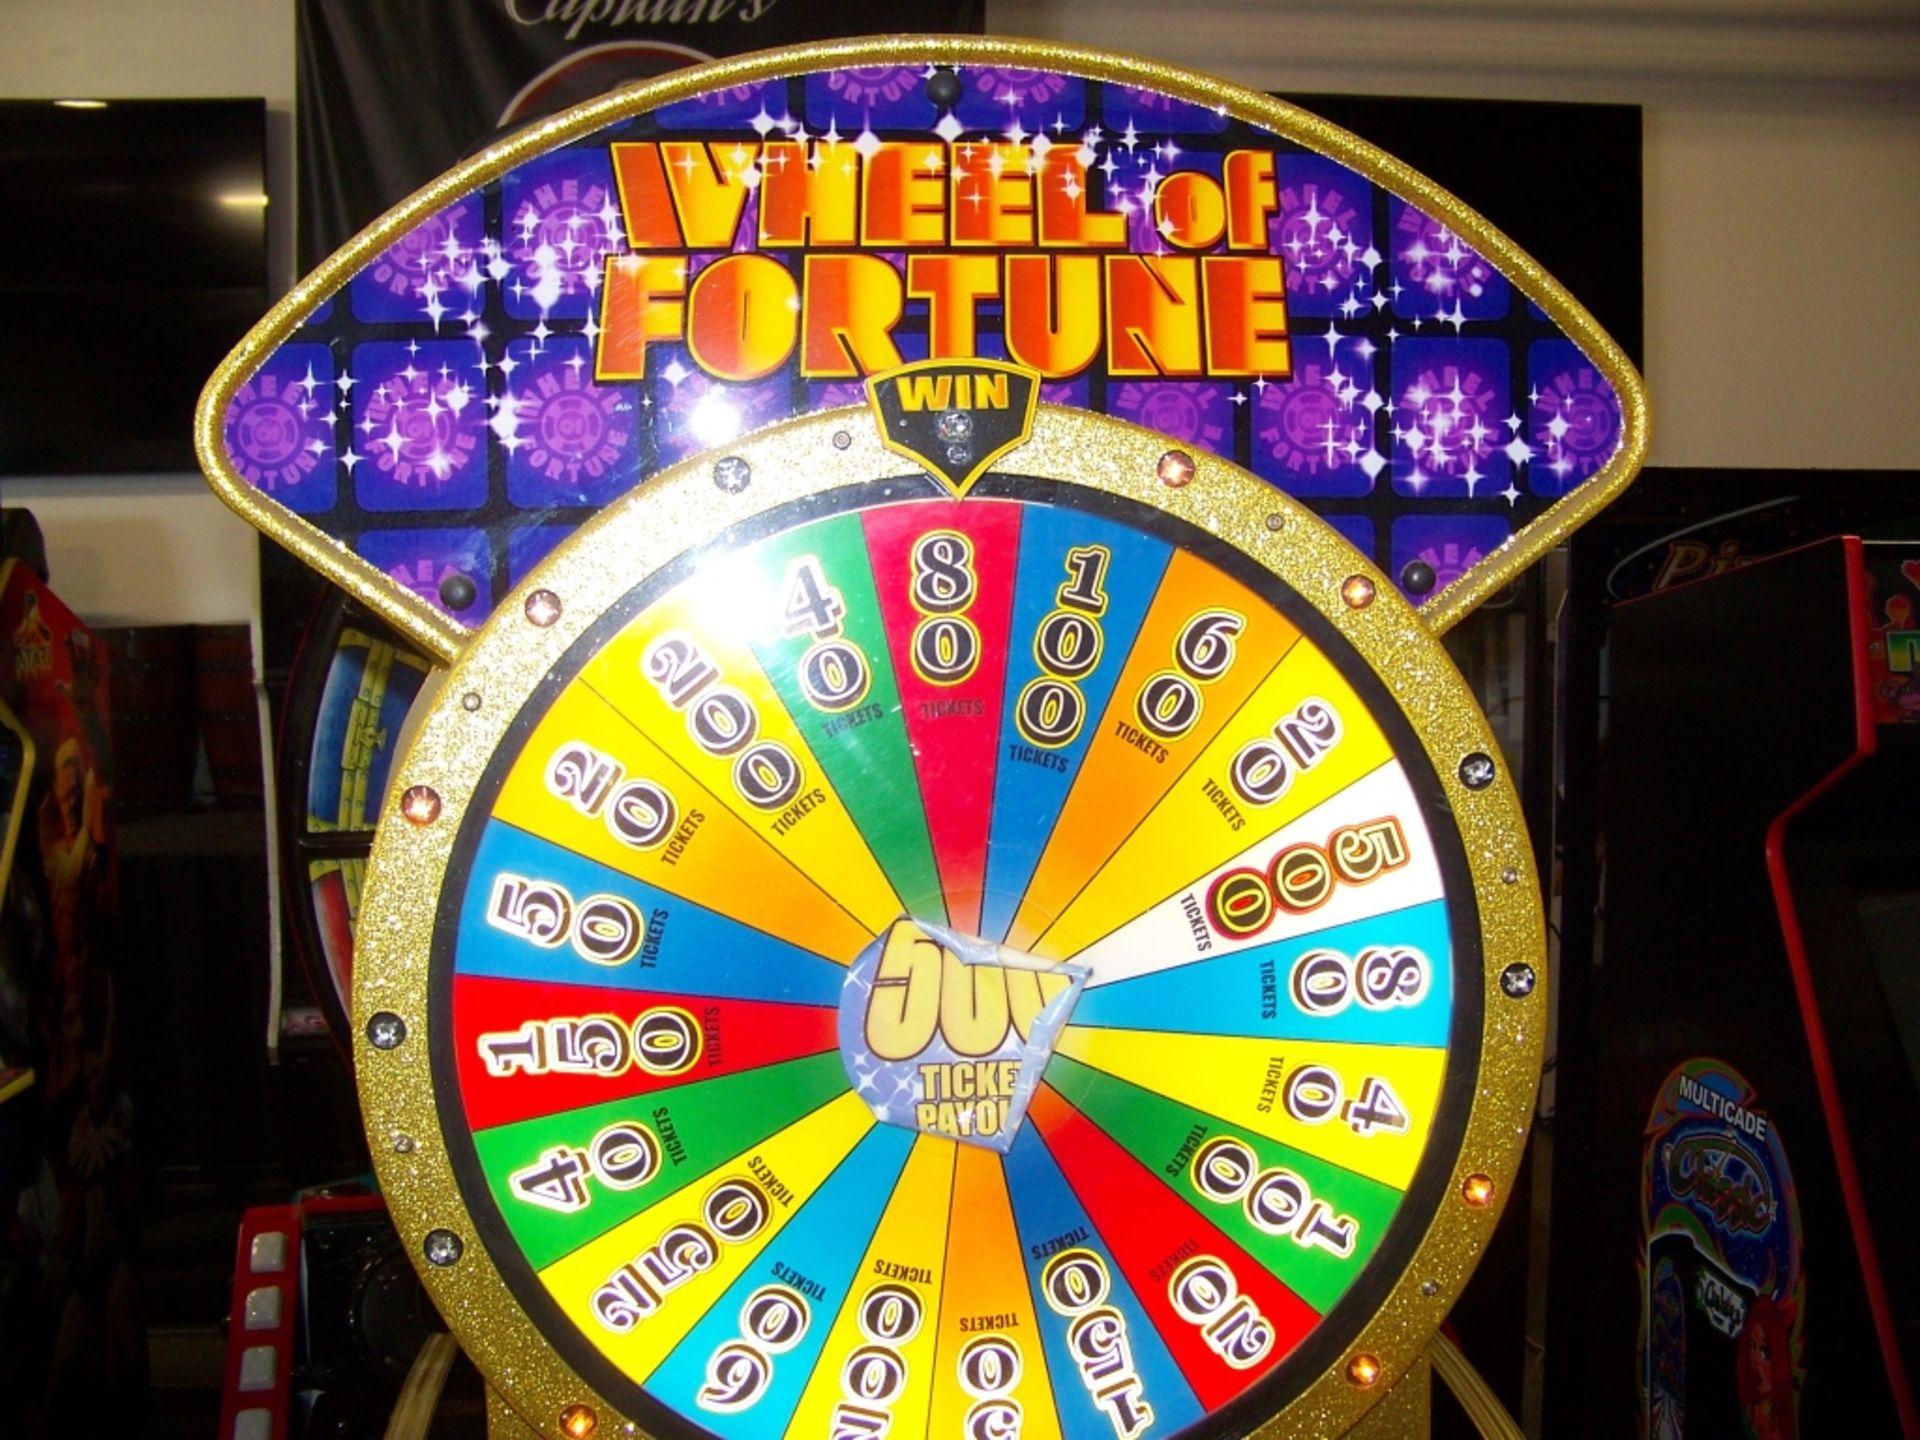 WHEEL OF FORTUNE TICKET REDEMPTION PUSHER GAME - Image 7 of 7